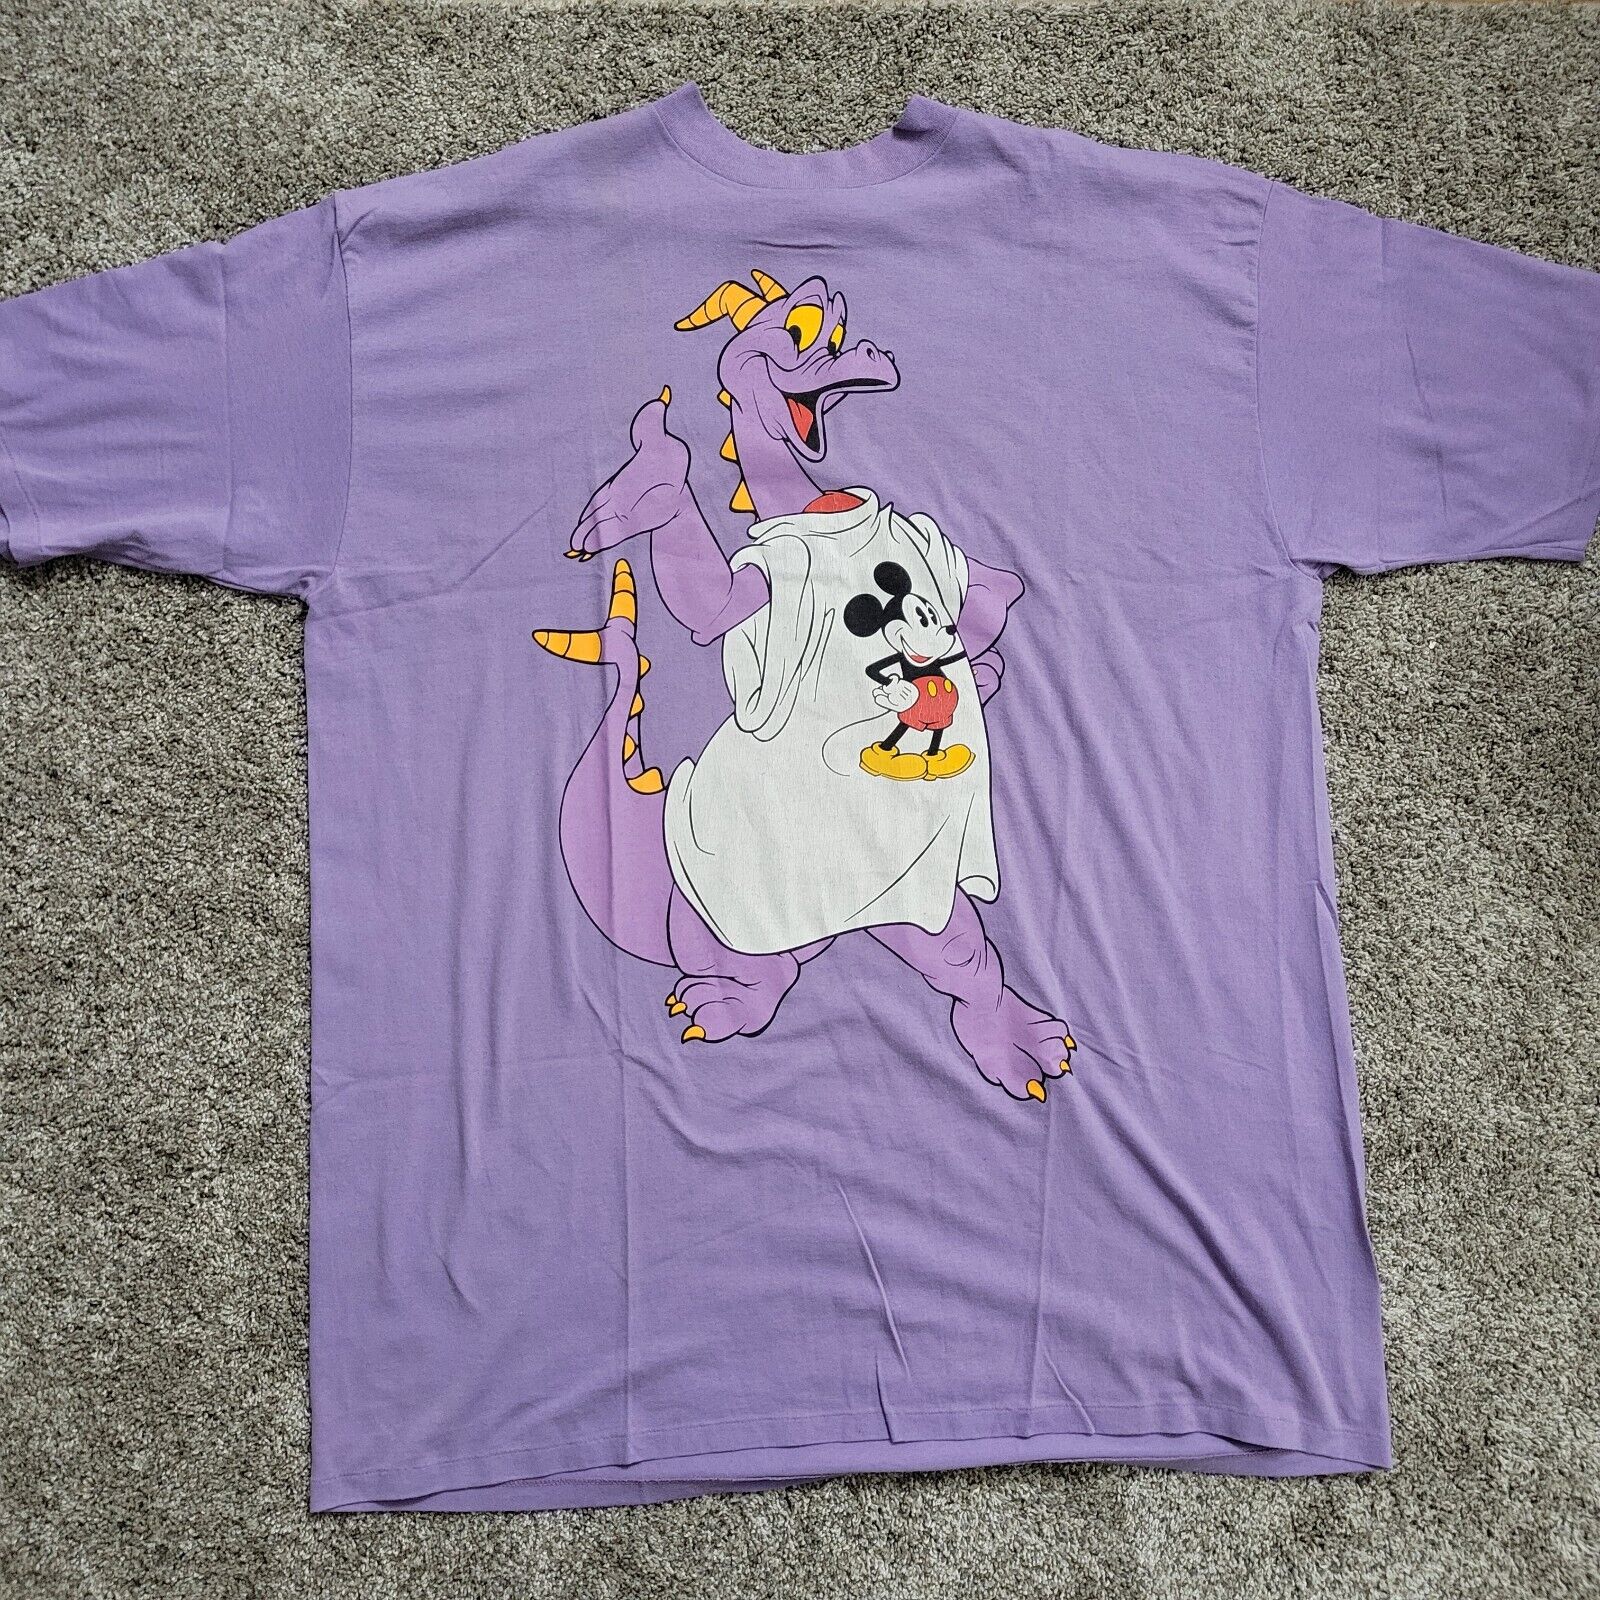 Vintage Figment Sleep T Shirt Disney Designs Purple Oversized One Size Fits All